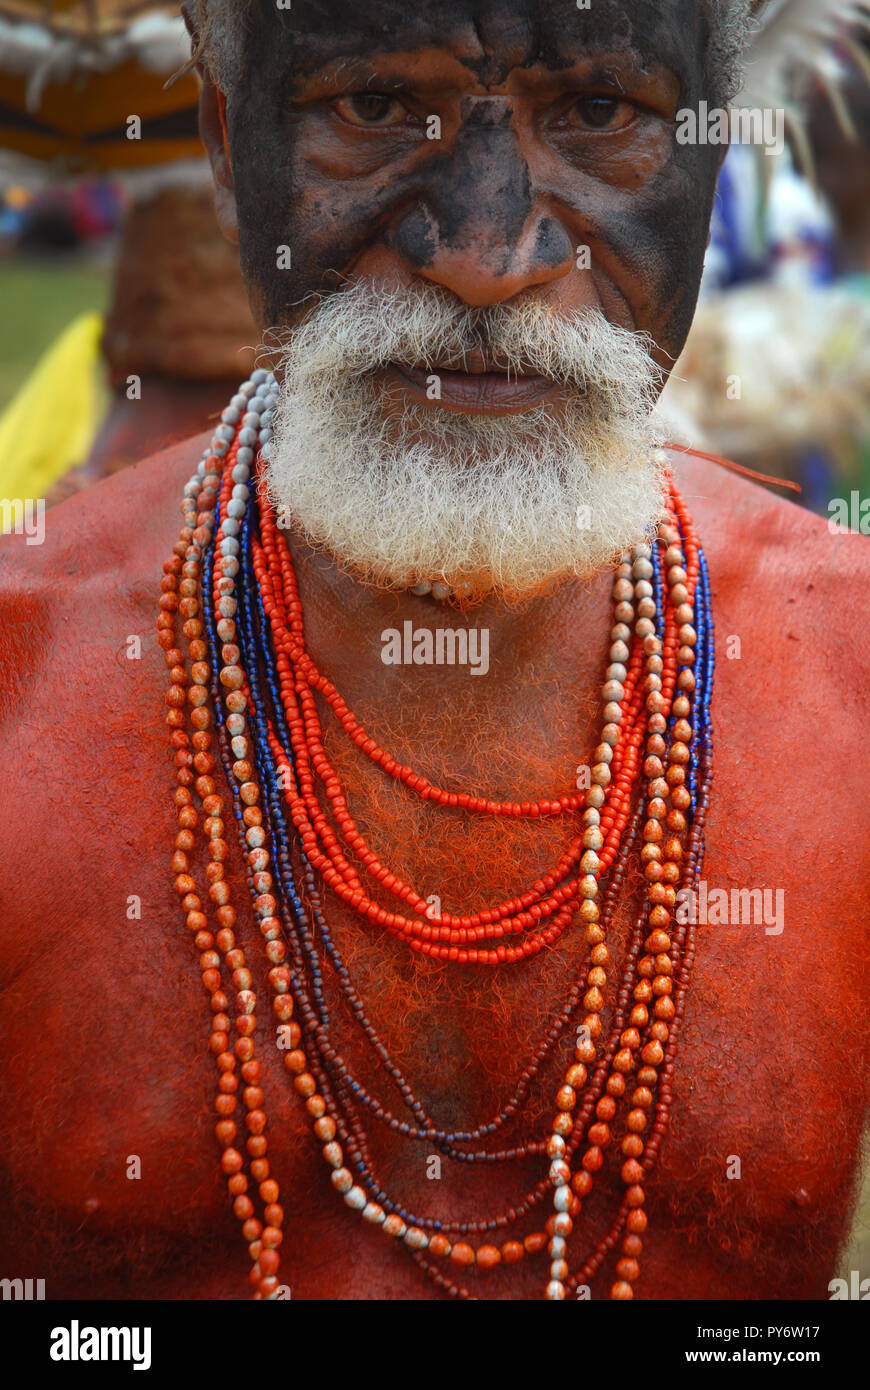 Colourfully dressed and face painted old man with shell necklaces as part of the annual Sing Sing in Madang, Papua New Guinea. Stock Photo